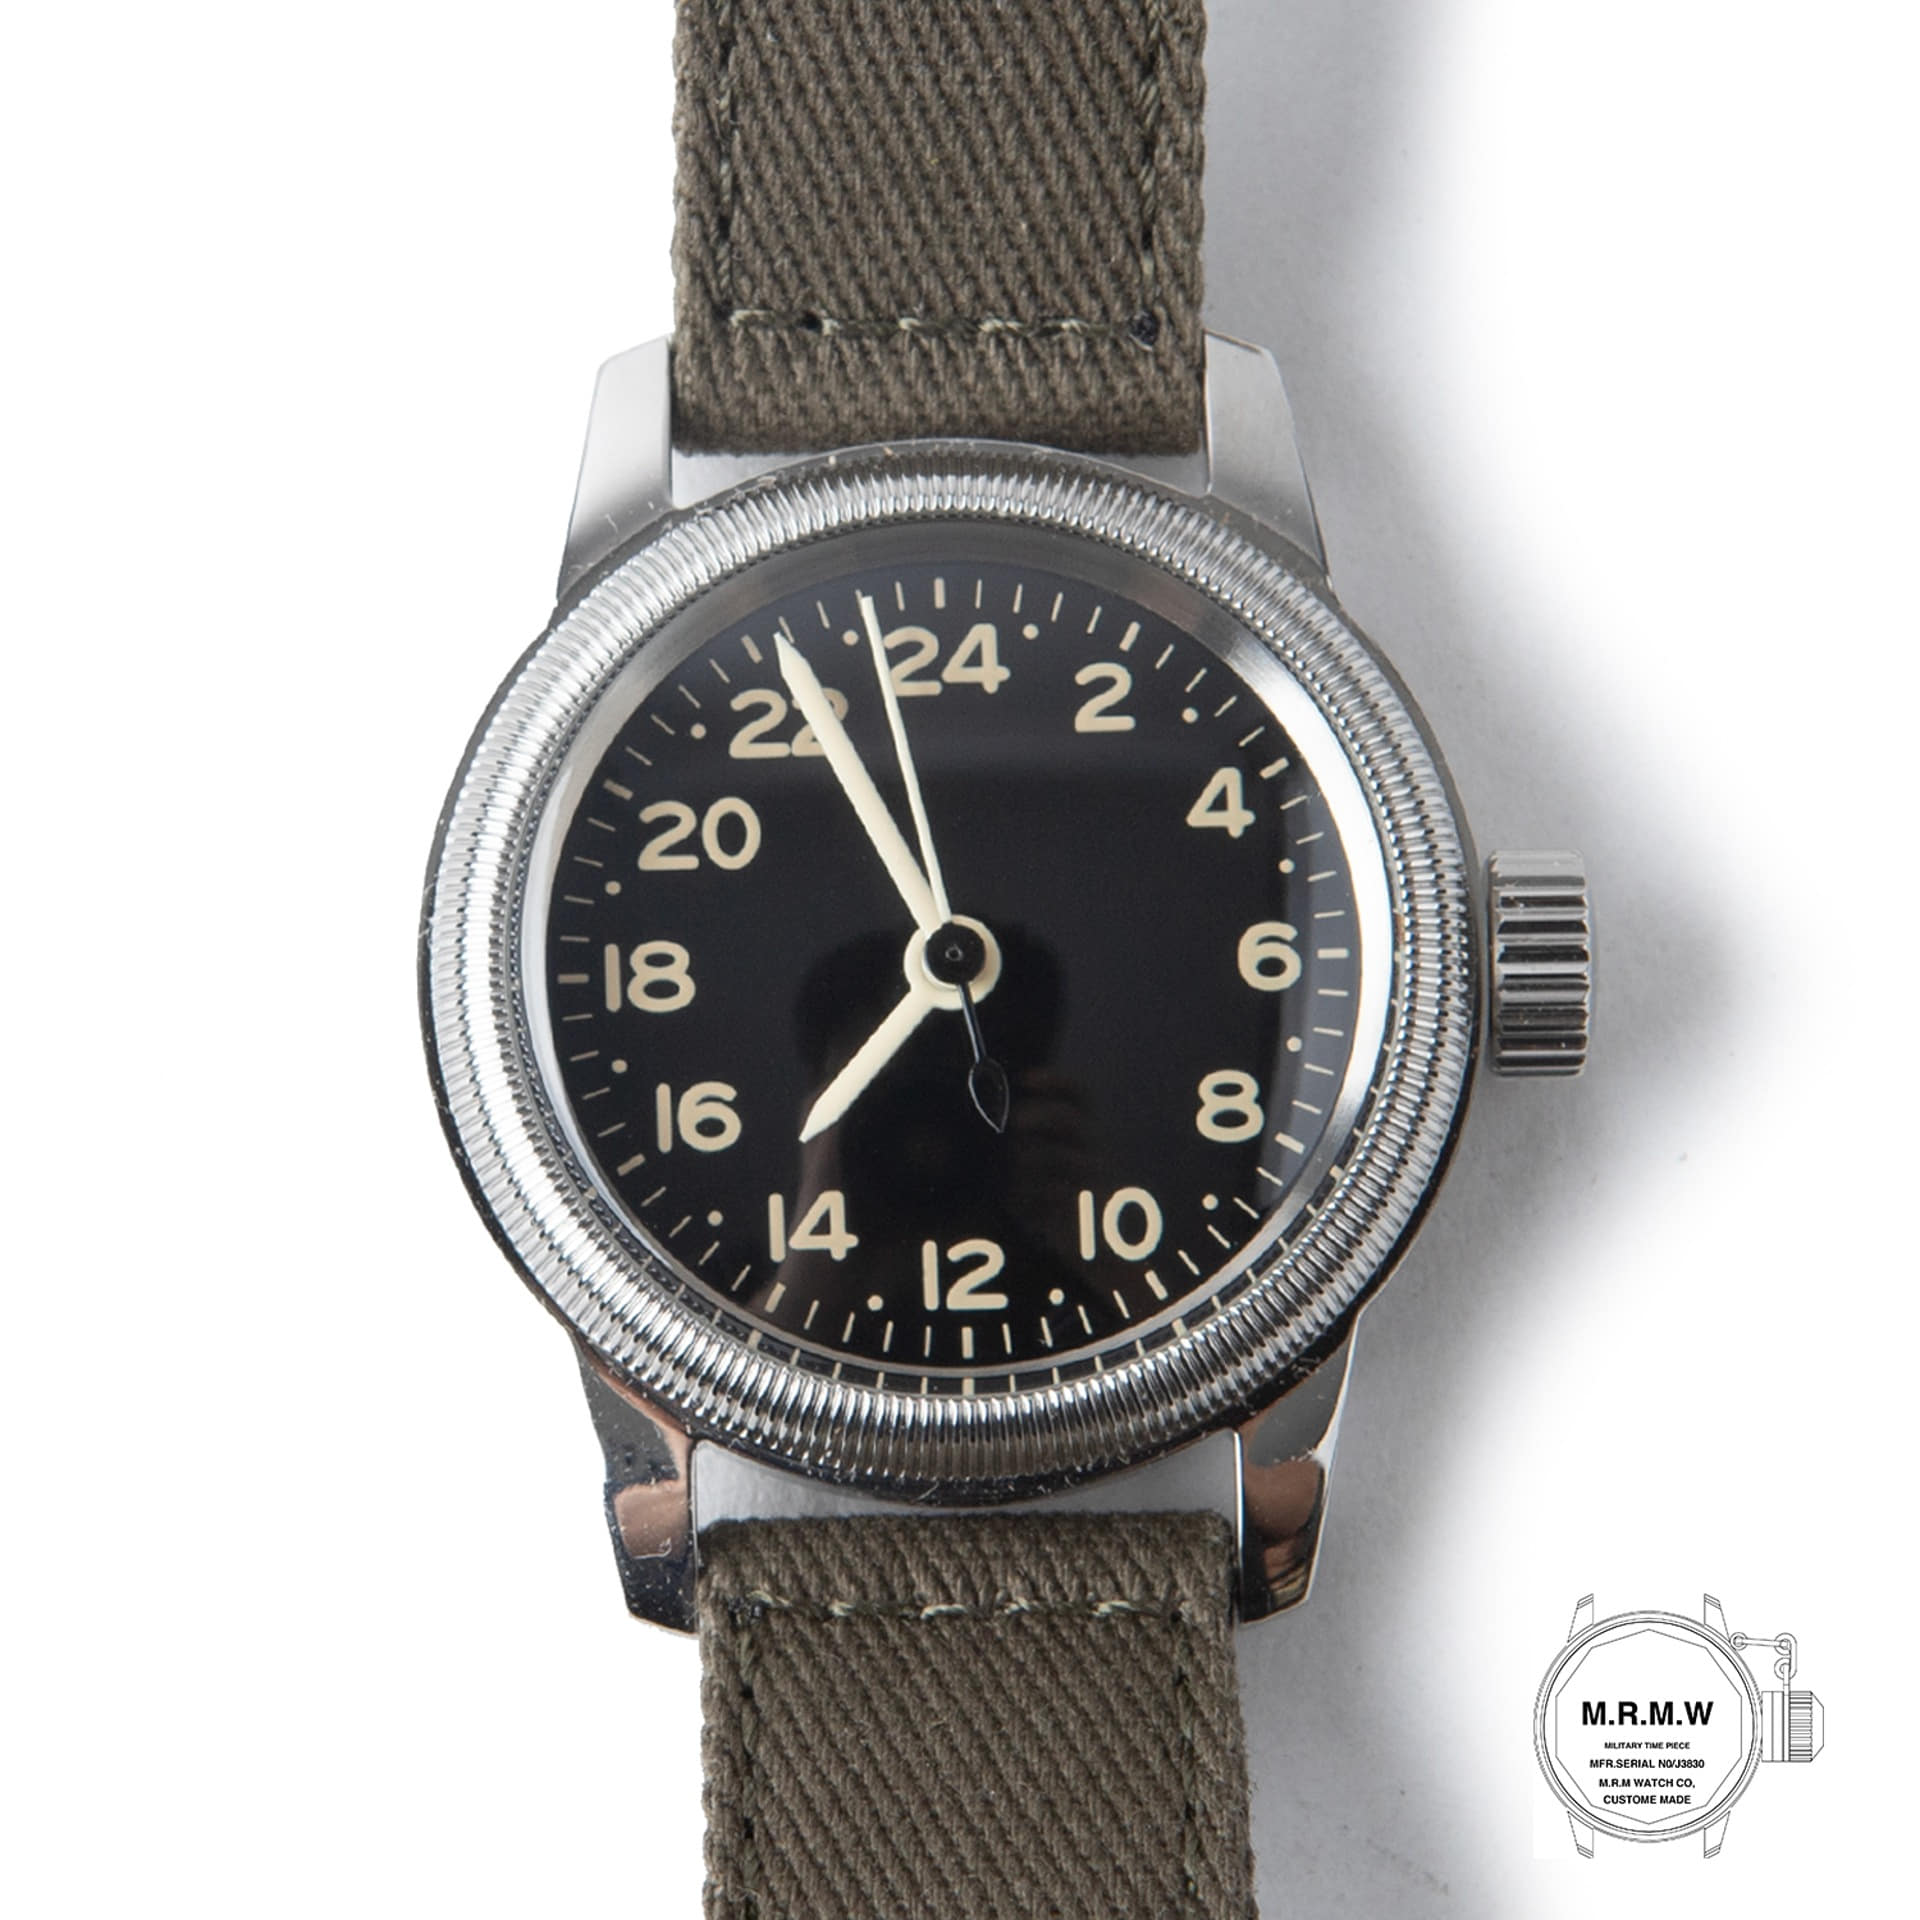 TYPE A-11 24HOUR MOVEMENT (Black)